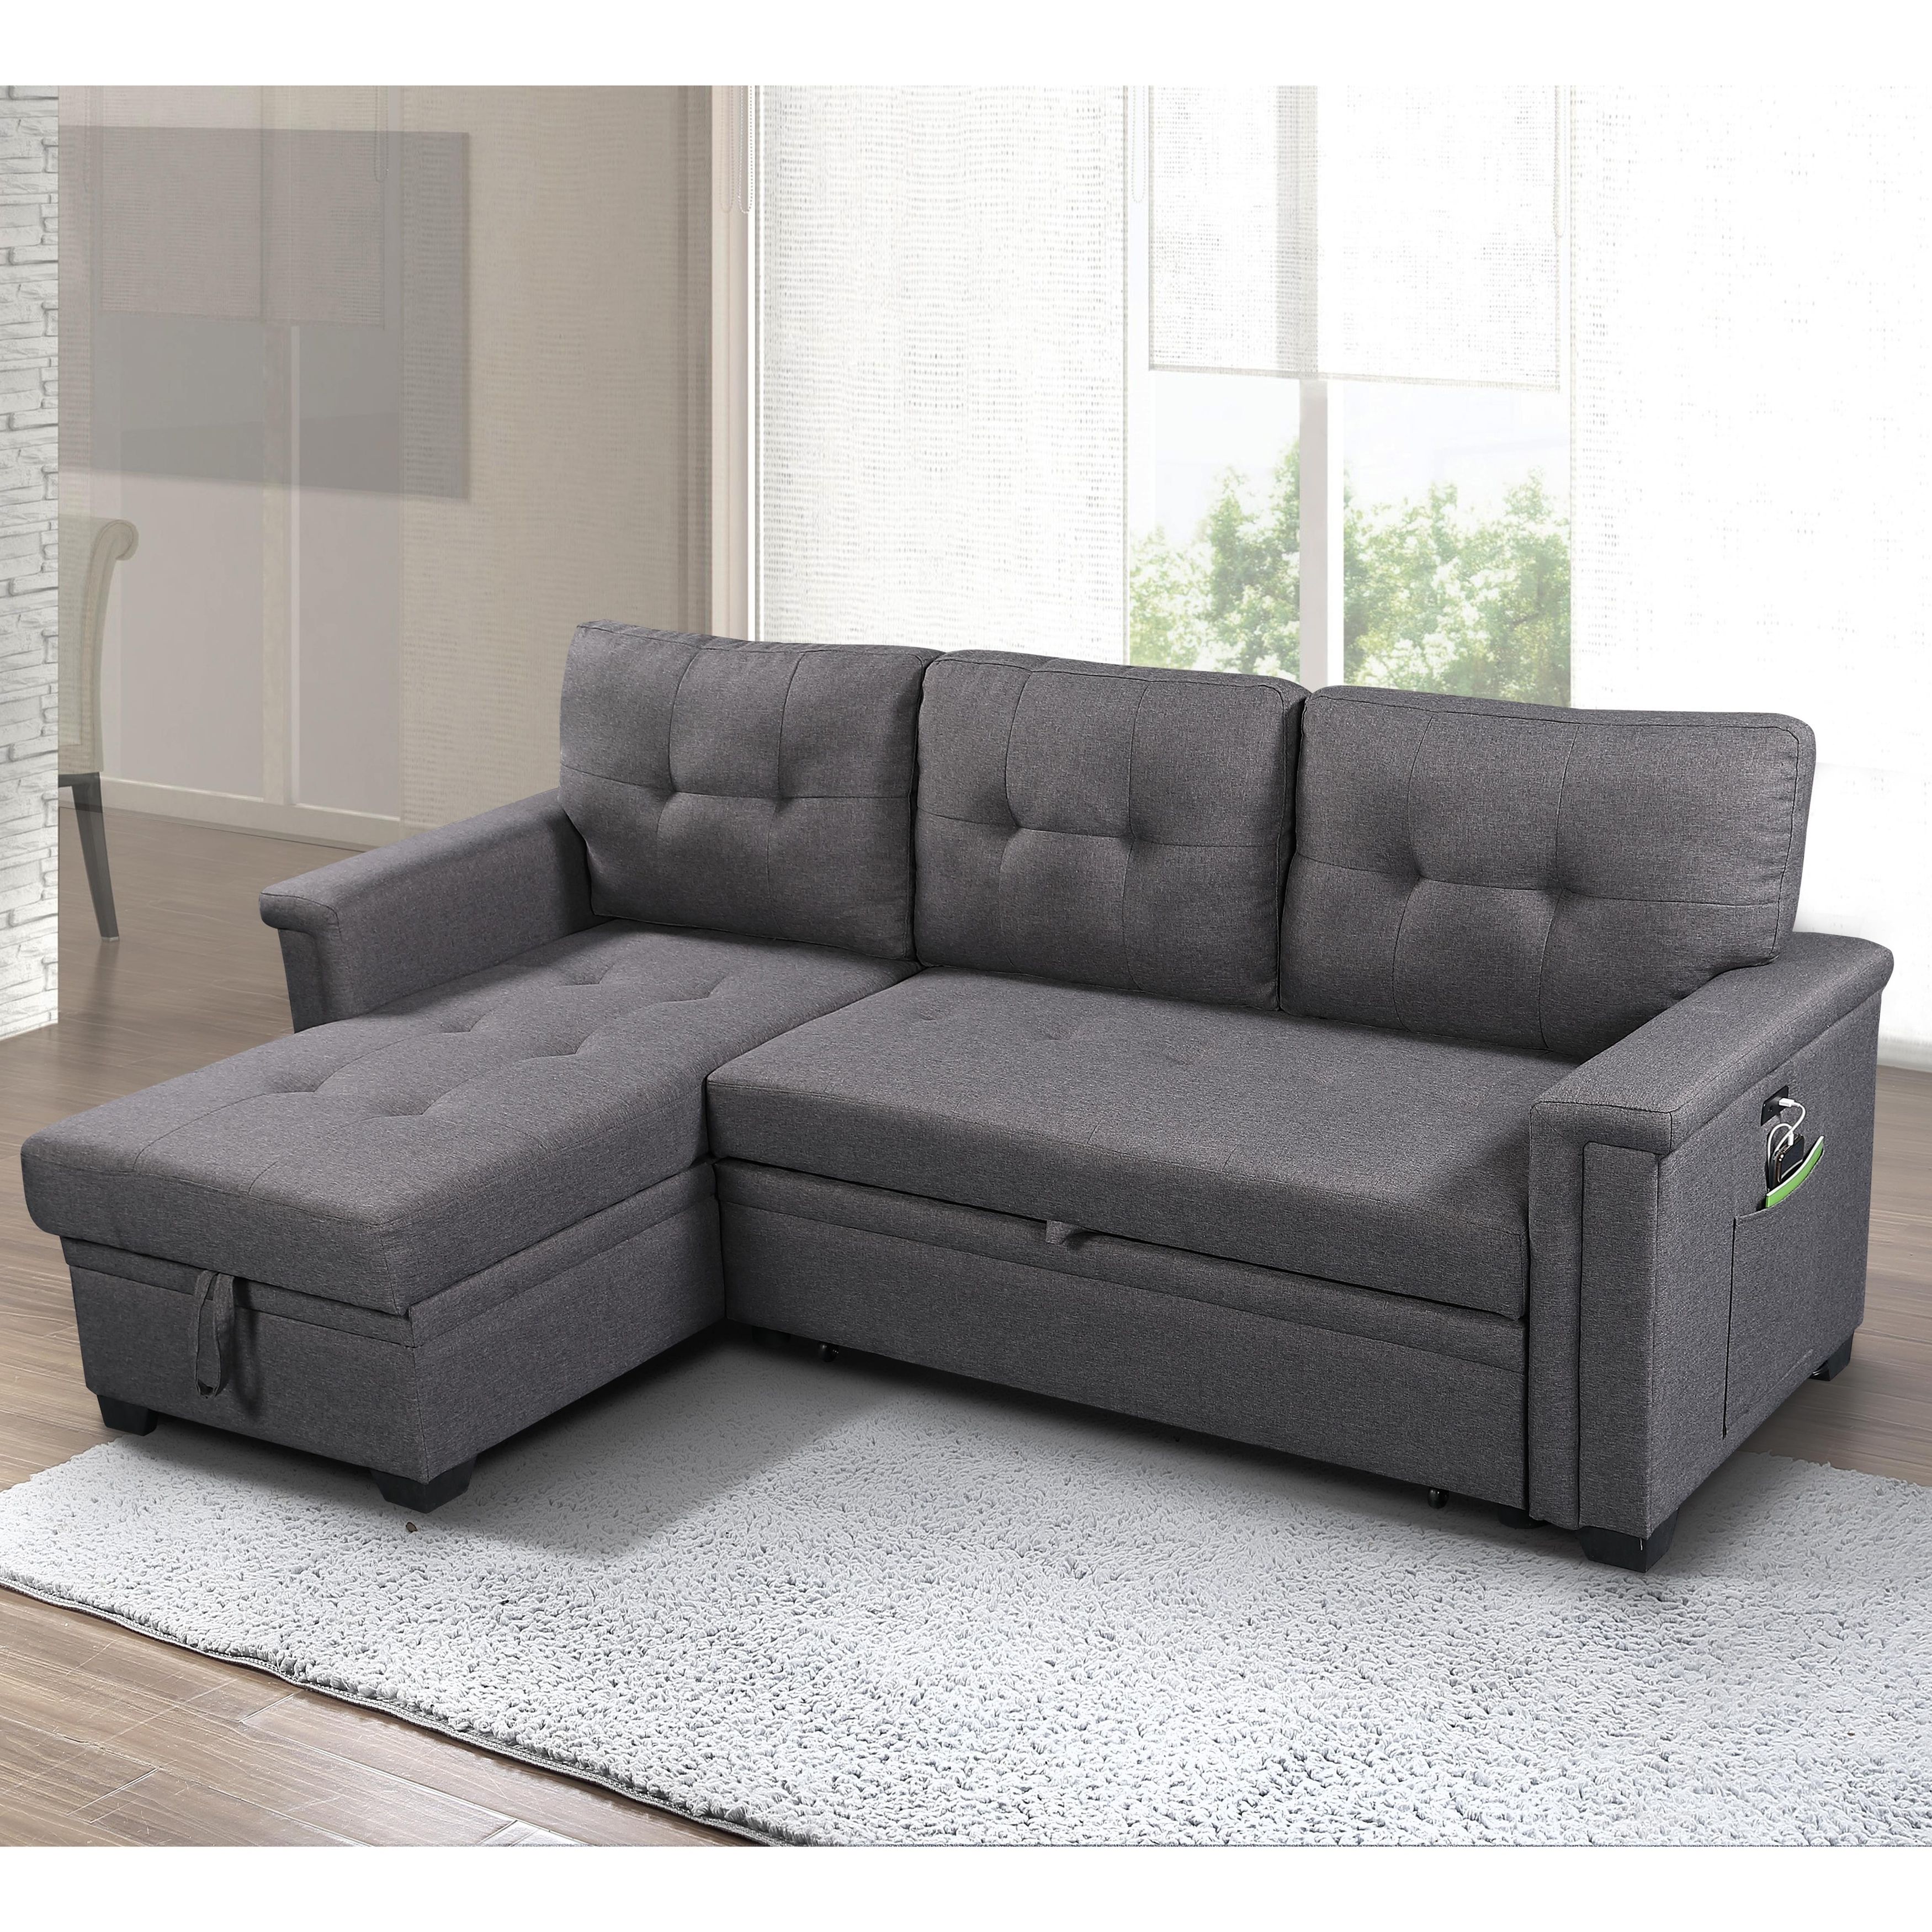 Ashlyn Reversible Sleeper Sofa With Storage Chaise – On Sale – – 30144937 Pertaining To Sleeper Sofas With Storage (View 2 of 20)